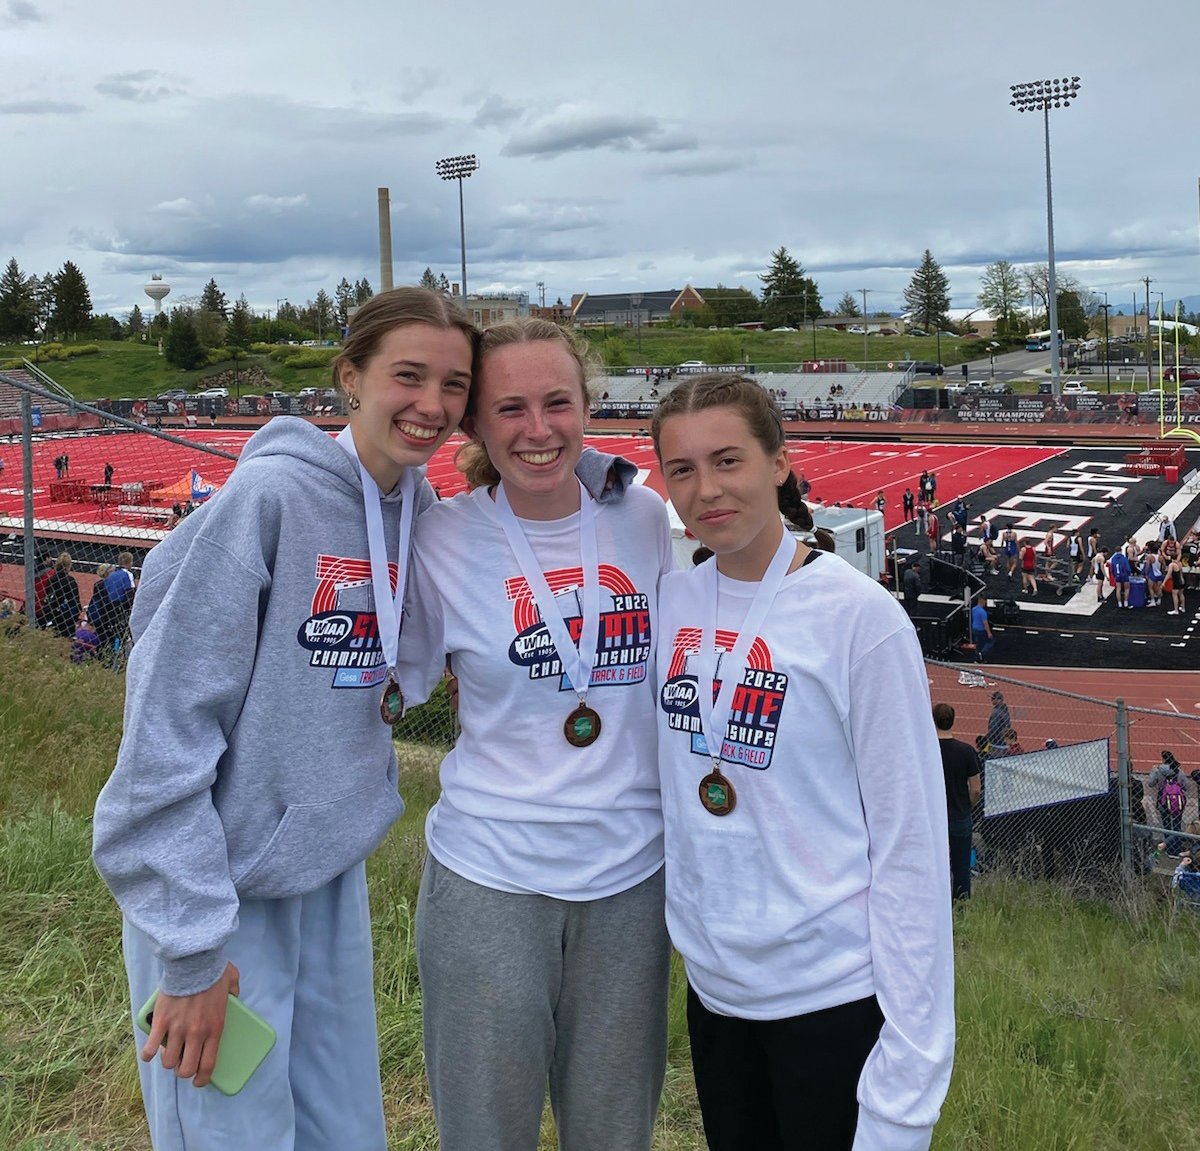 Aliyah Yearian, Camryn Hines, and Lia Poore pose together at the WIAA State Championship track meet in Cheney.